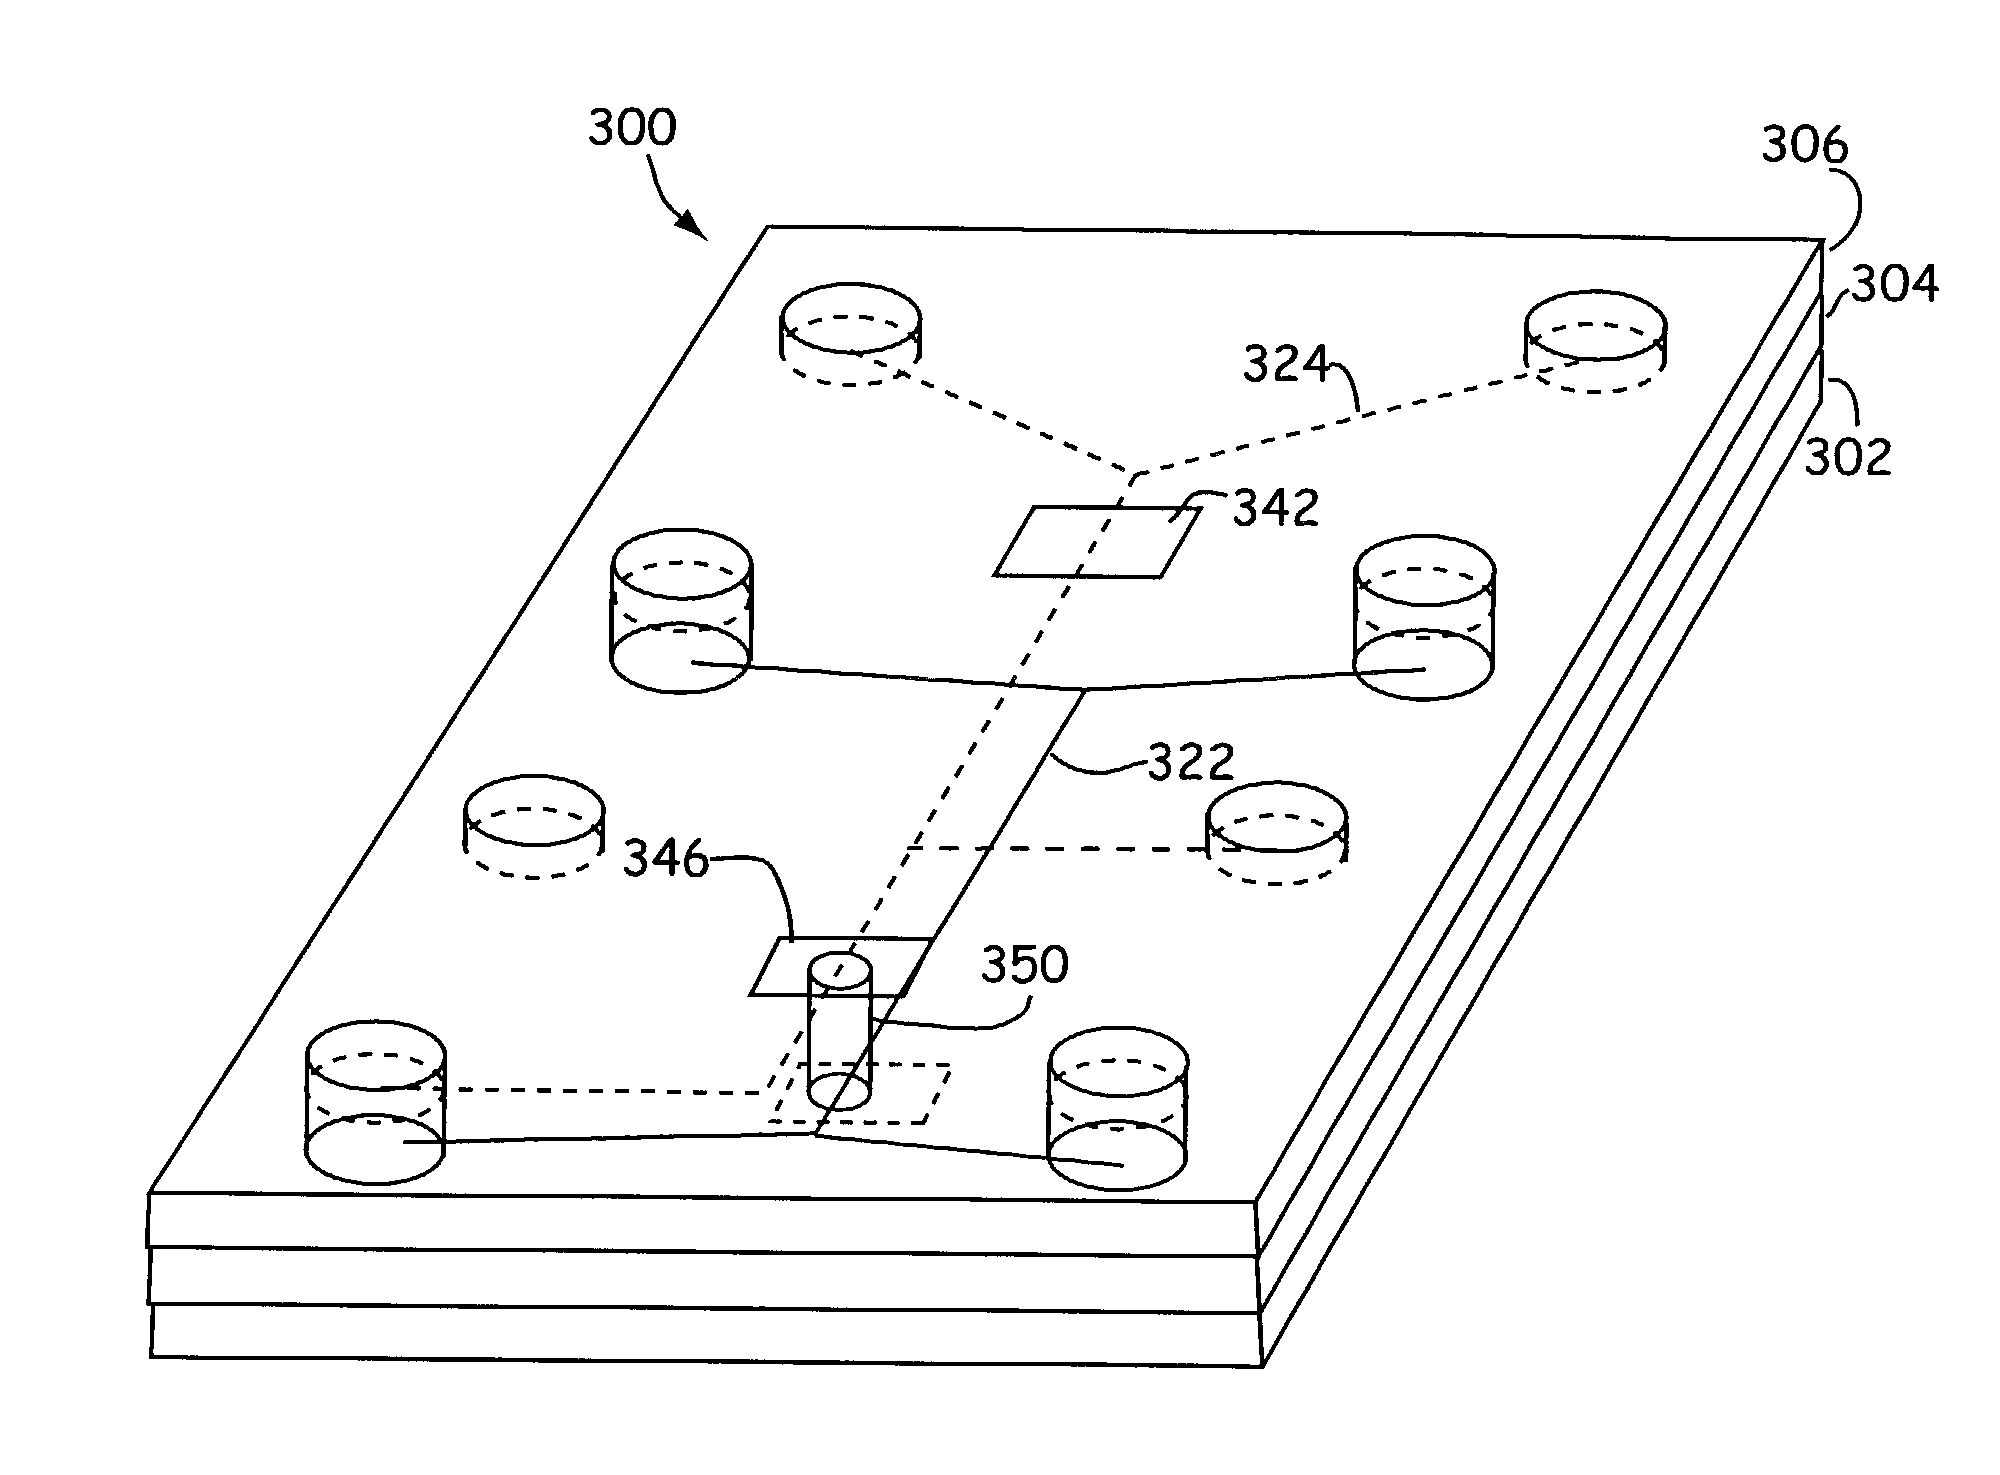 Microfluidic devices and methods of their manufacture